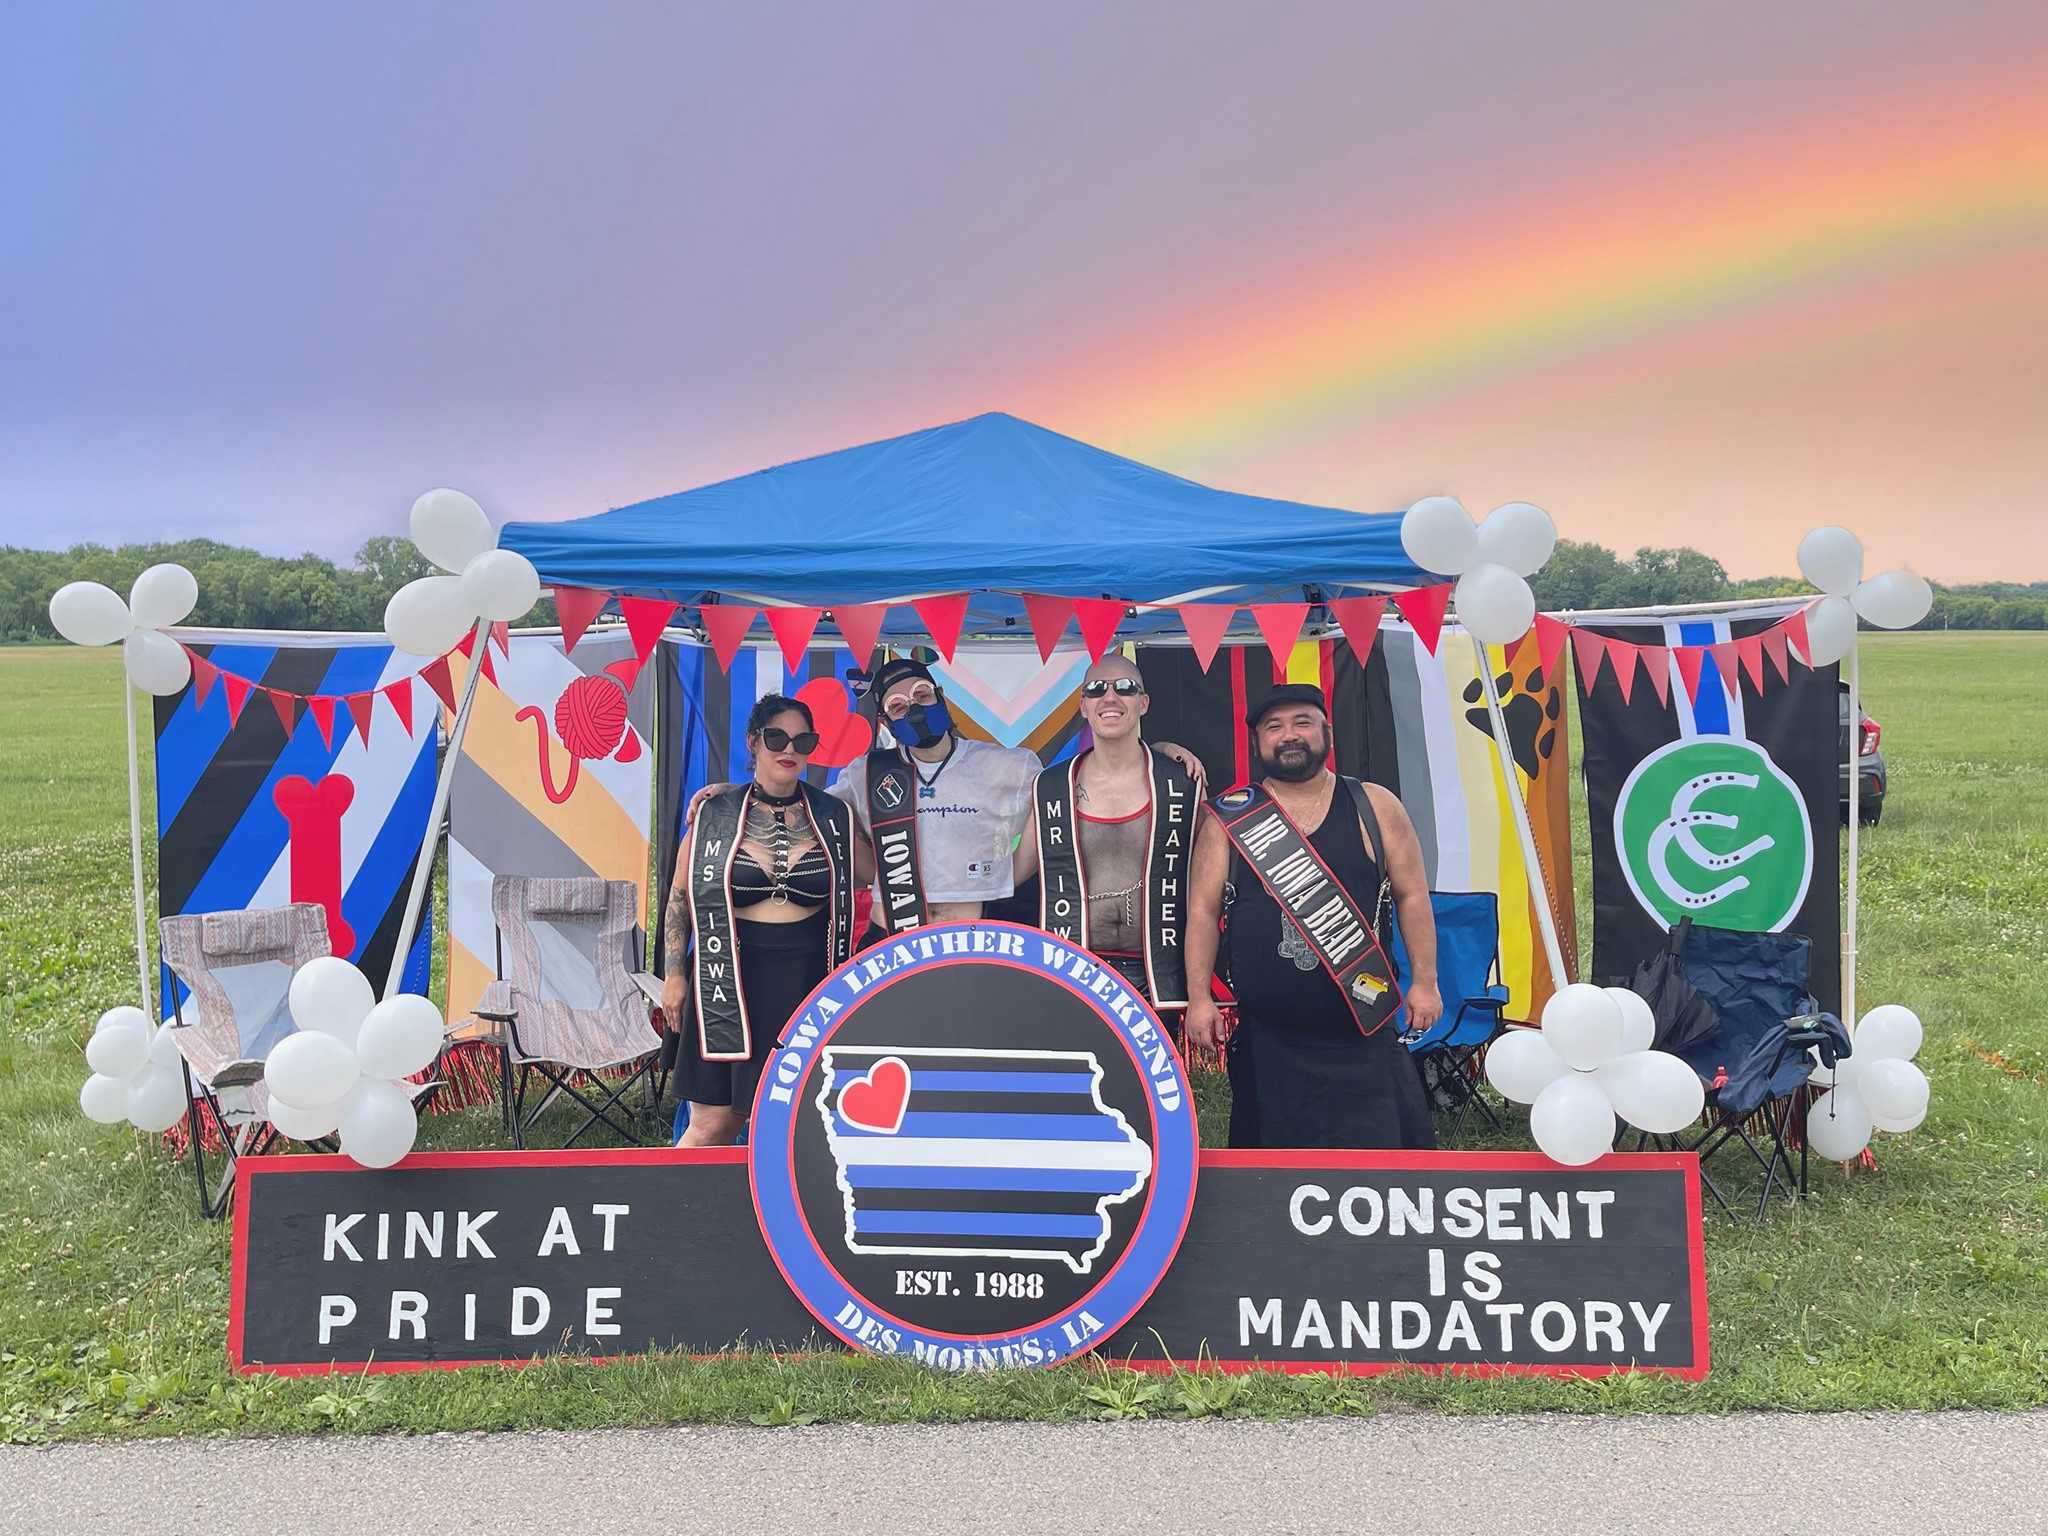 Bettie Rage, Deek Pheeps and other title holders at the Iowa Leather Weekend tent at Capital City Pride